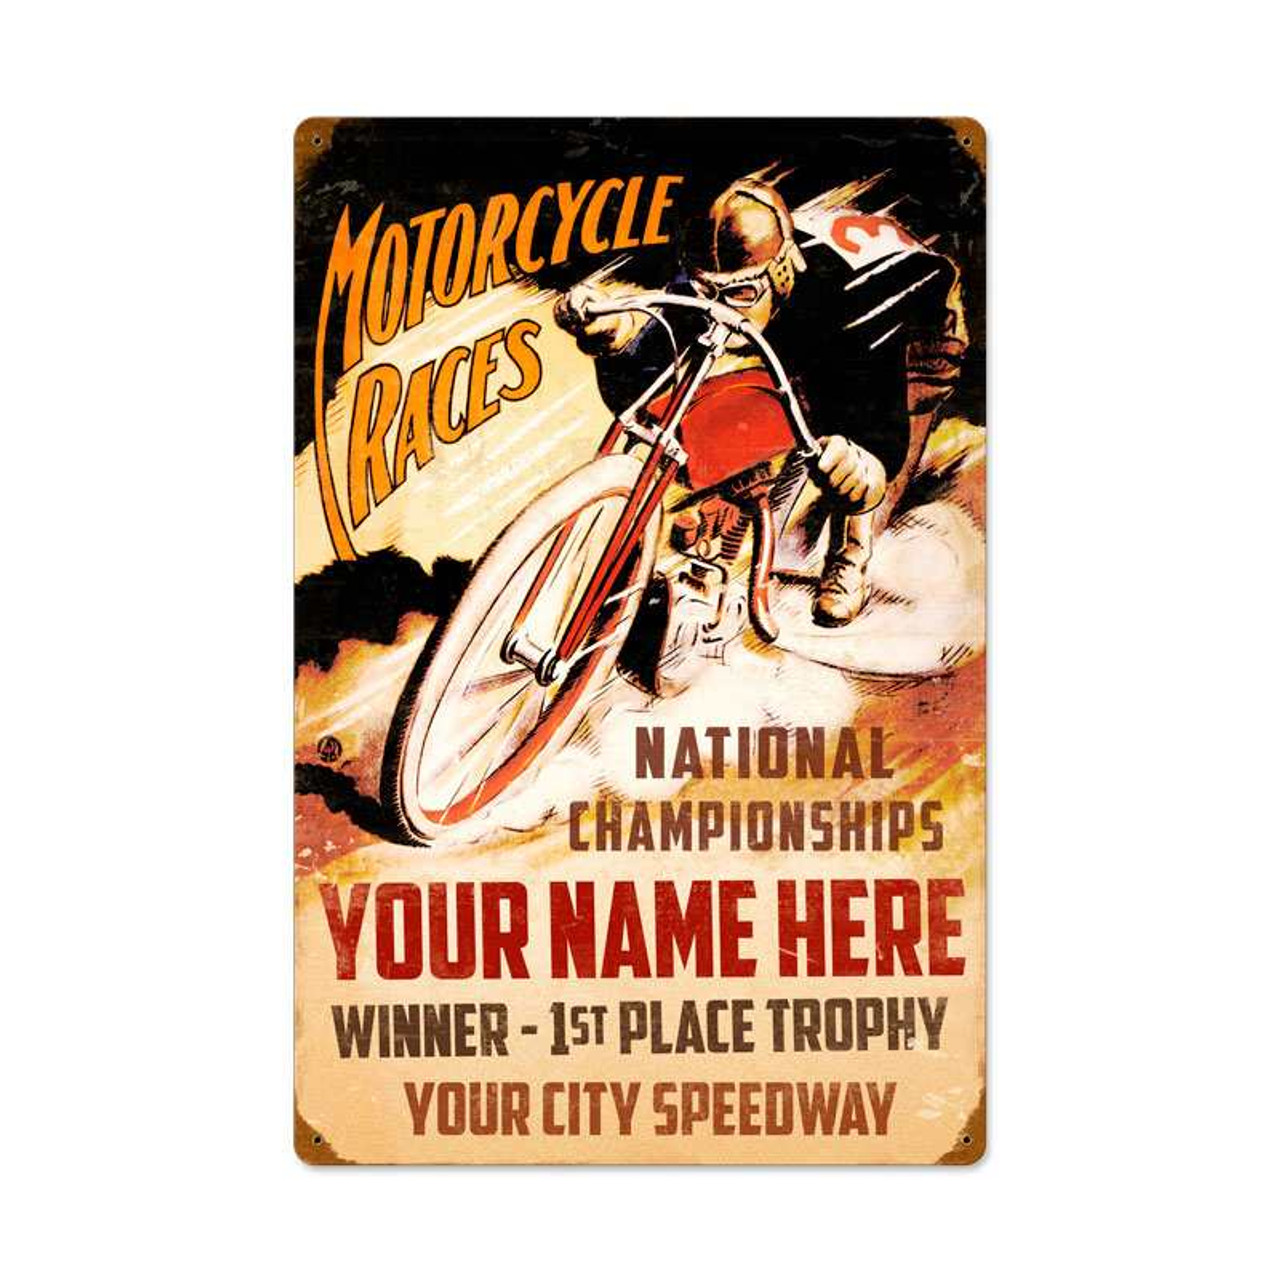 Vintage Motorcycle Races Metal Sign 16 x 24 Inches Inches